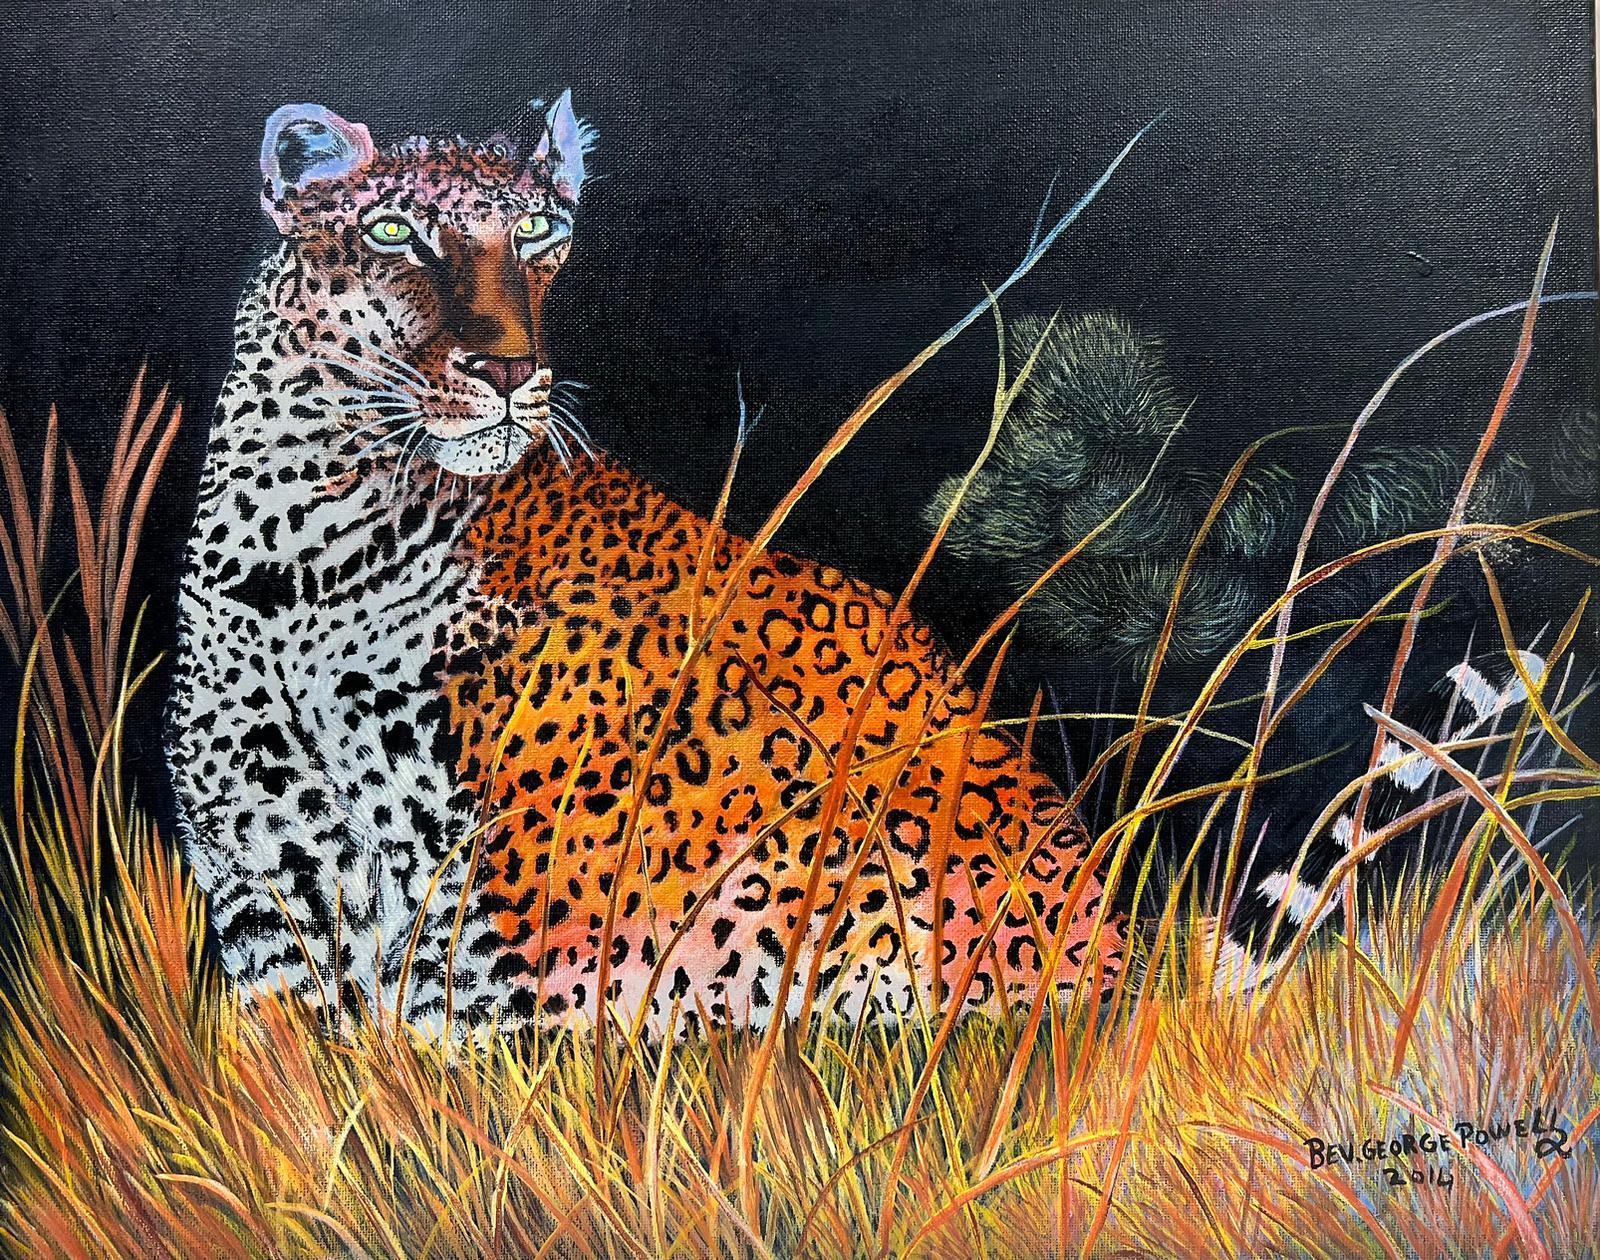 Ben Powell Landscape Painting - Contemporary British Acrylic Painting Cheetah in Landscape